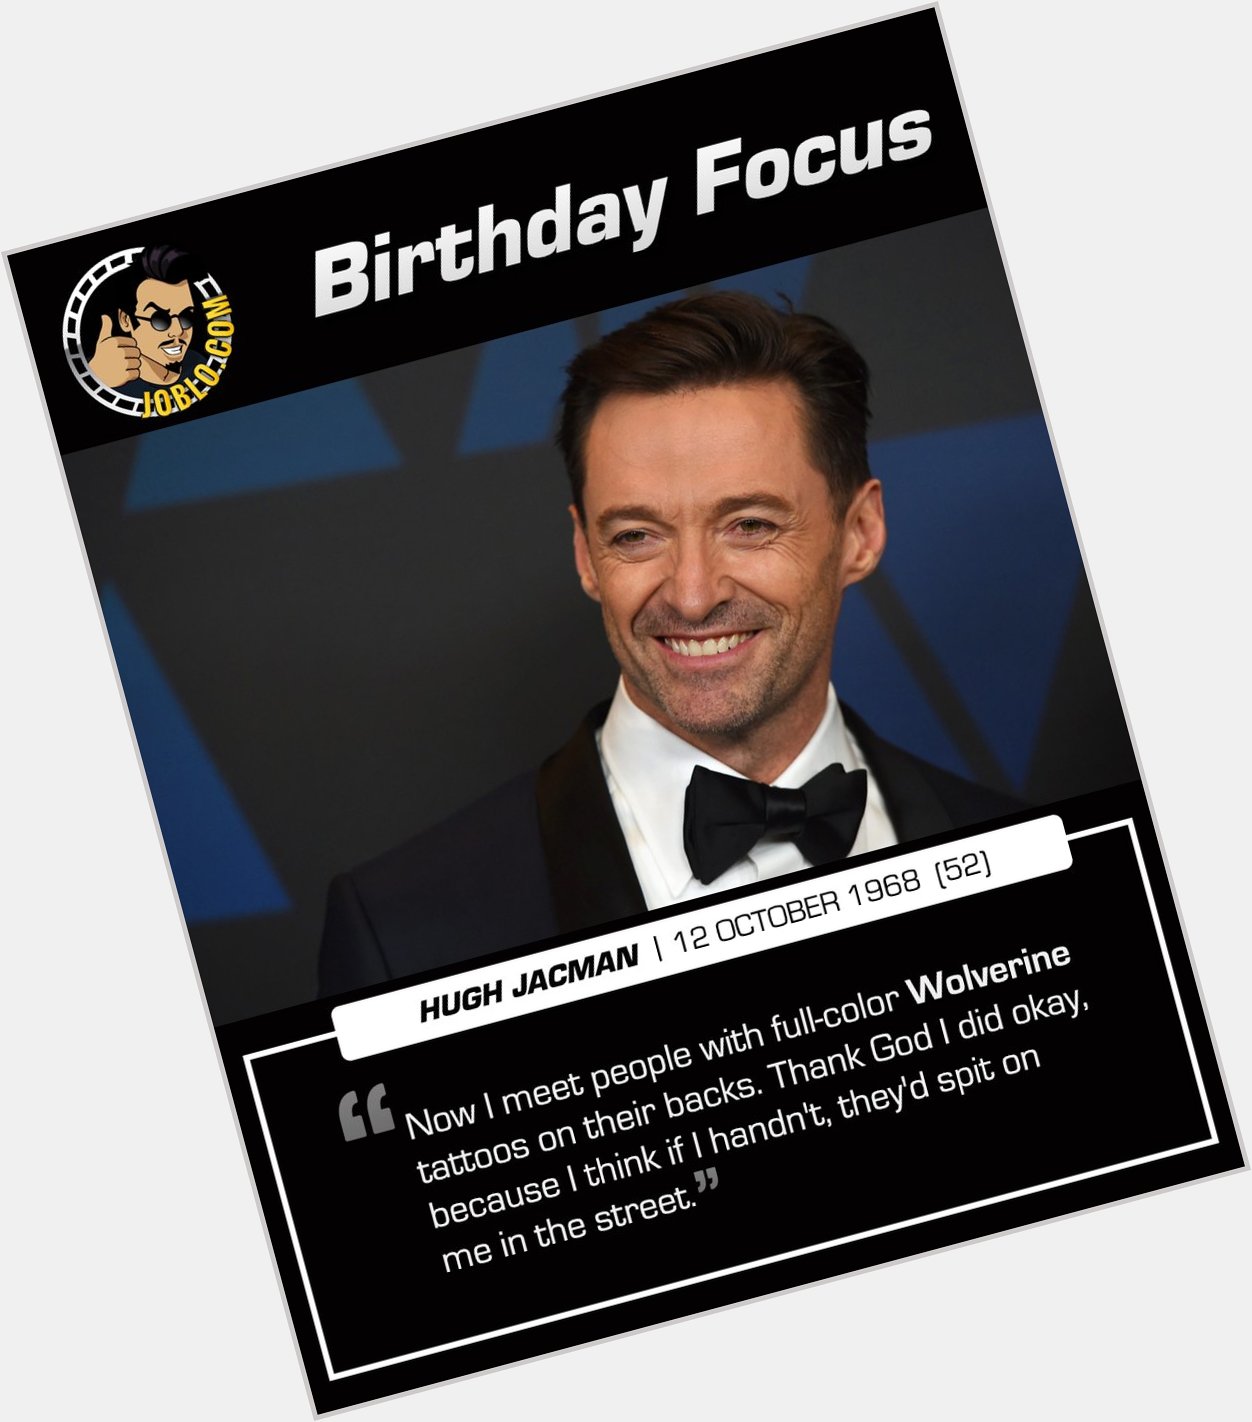 Happy 52nd birthday Hugh Jackman!

What do you think is his best performance? 